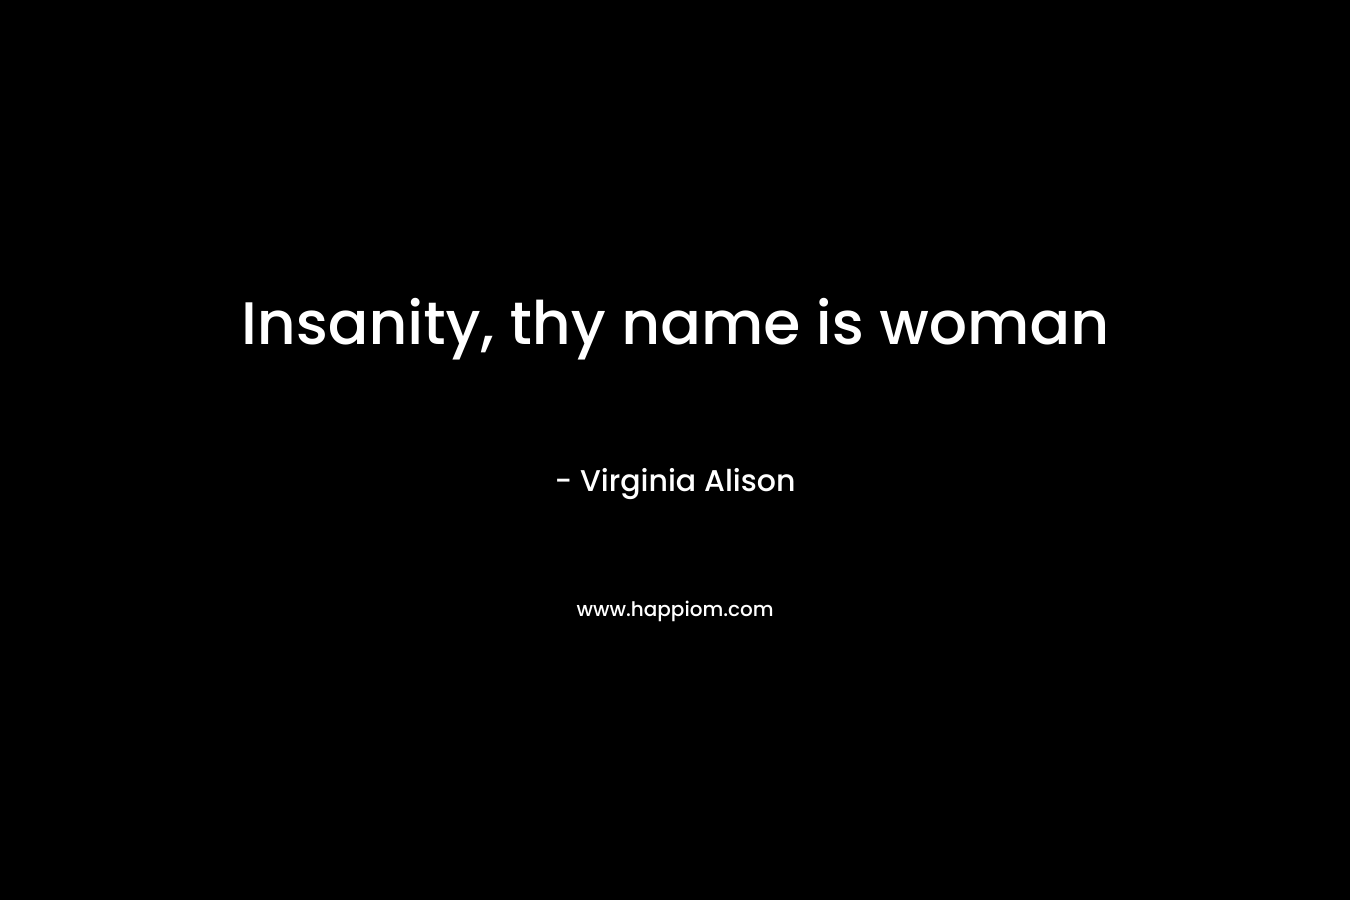 Insanity, thy name is woman